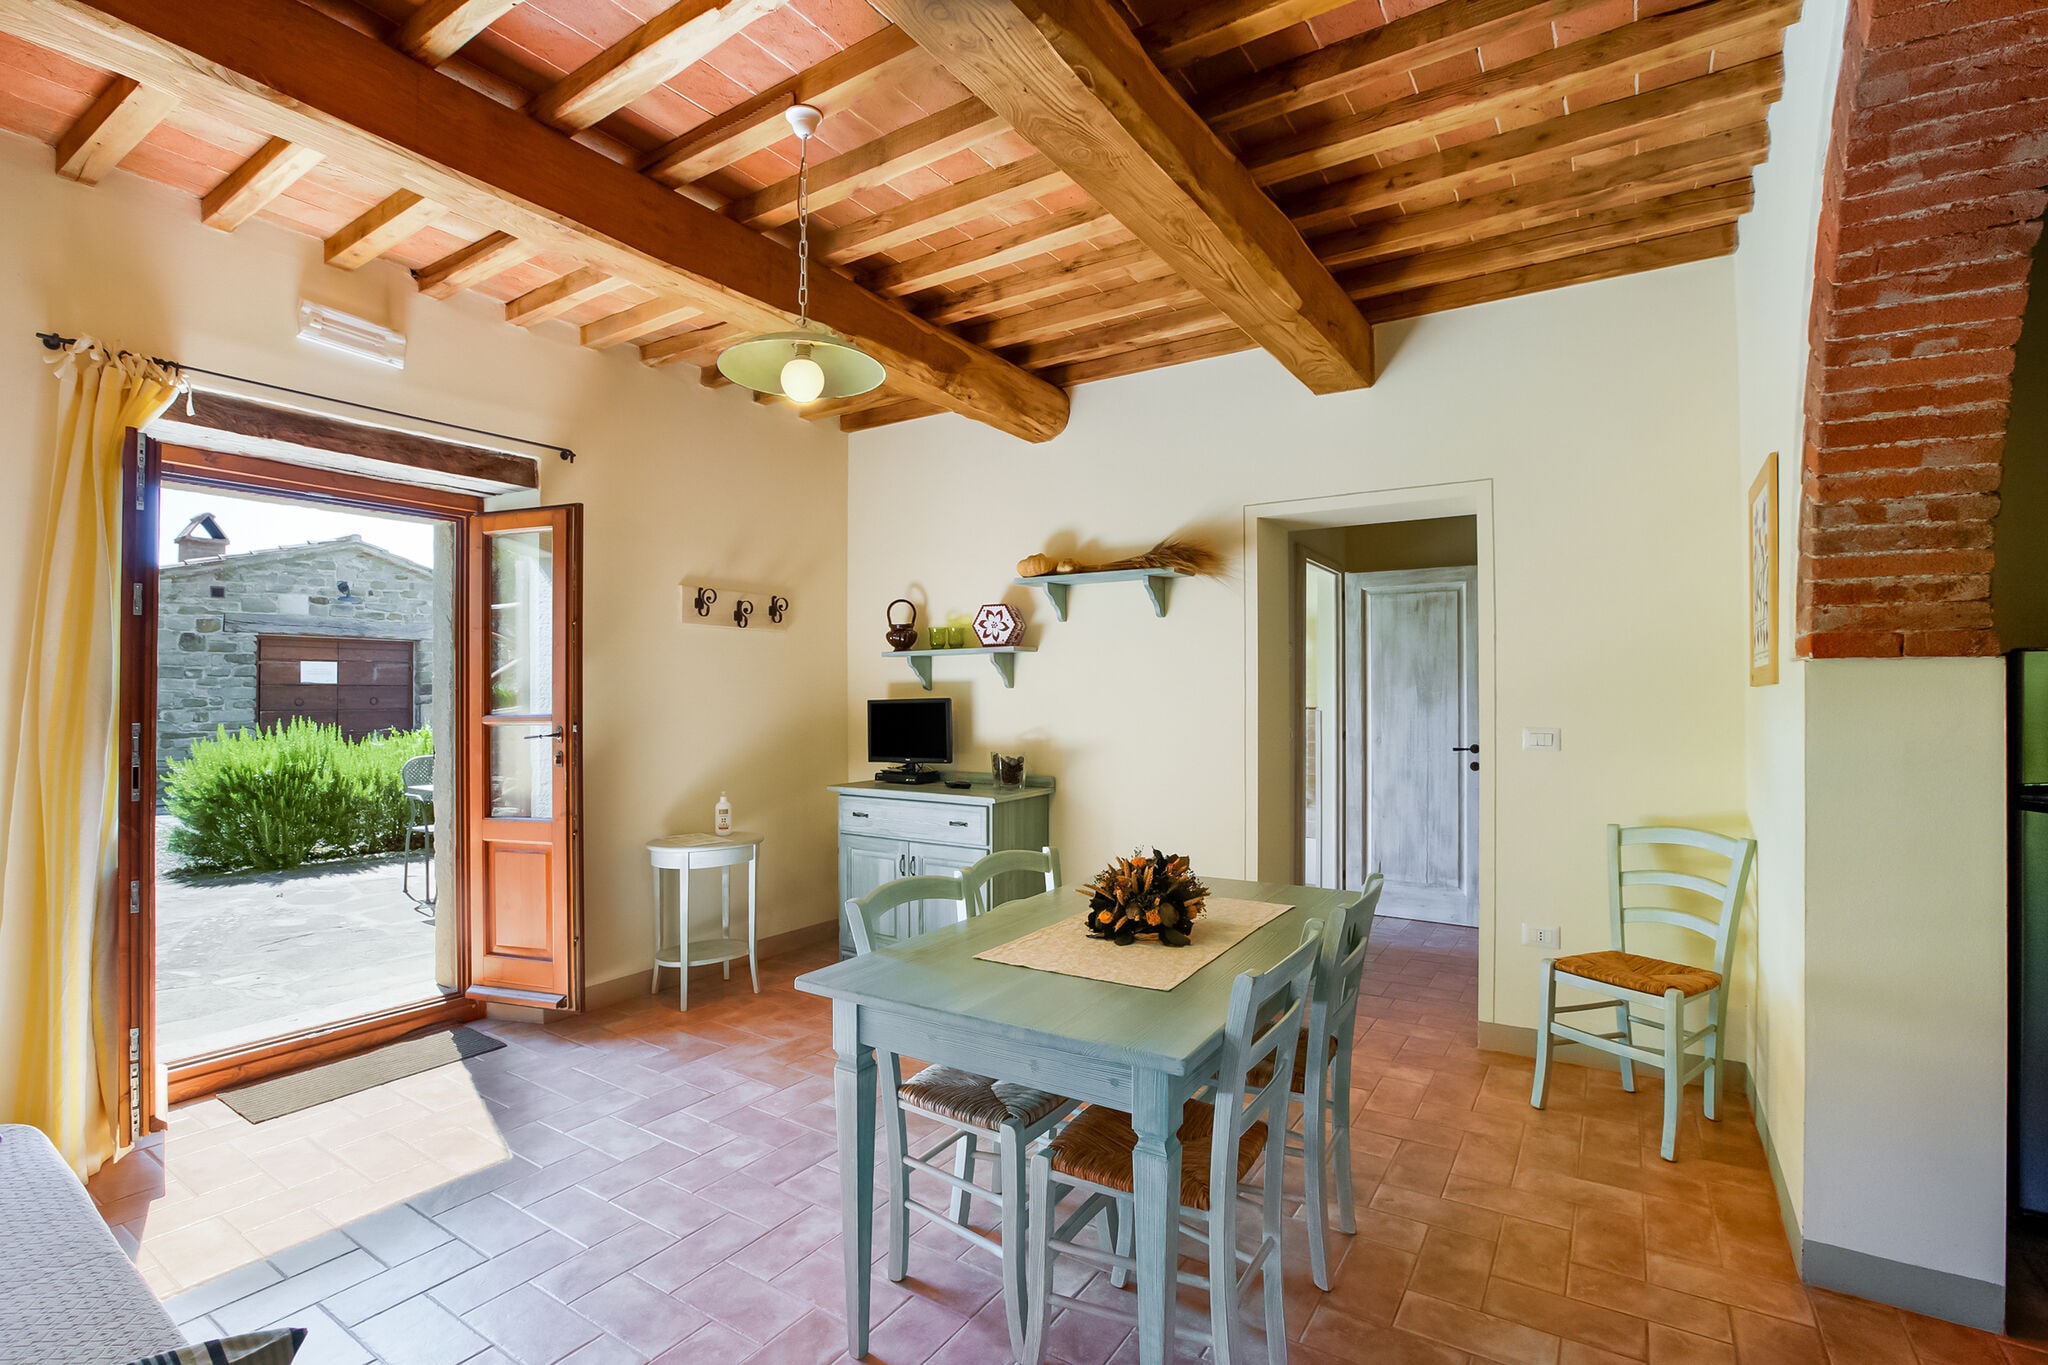 Apartment in a holiday home in Anghiari with a view of the hills